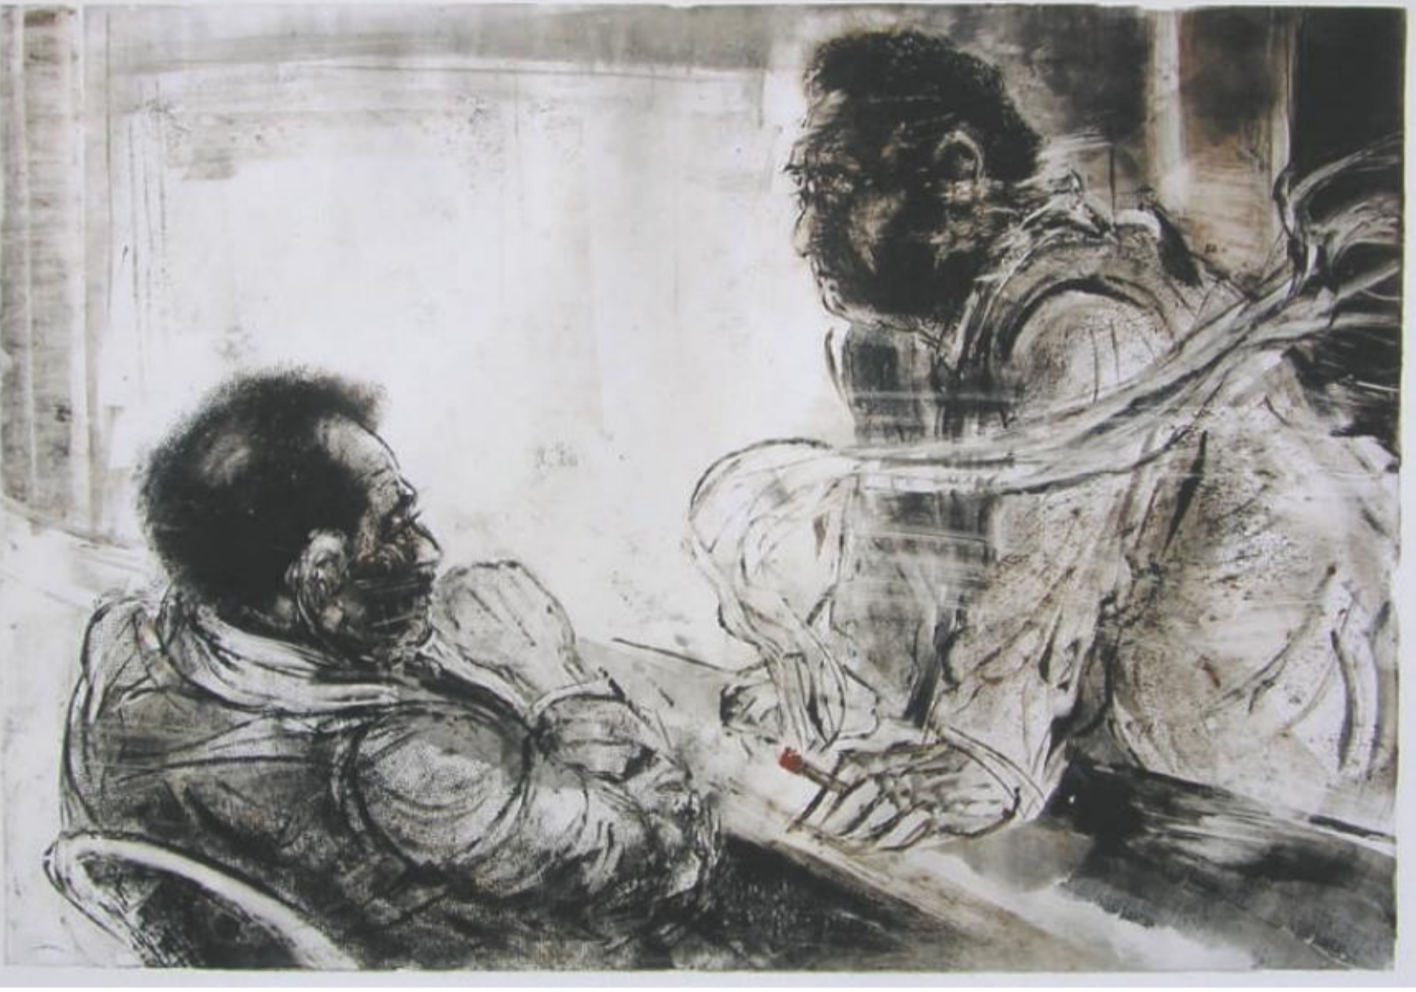 Print of two men staring at each other over a bar counter, with closer man seated and the further standing with a lit cigarette in his hand 